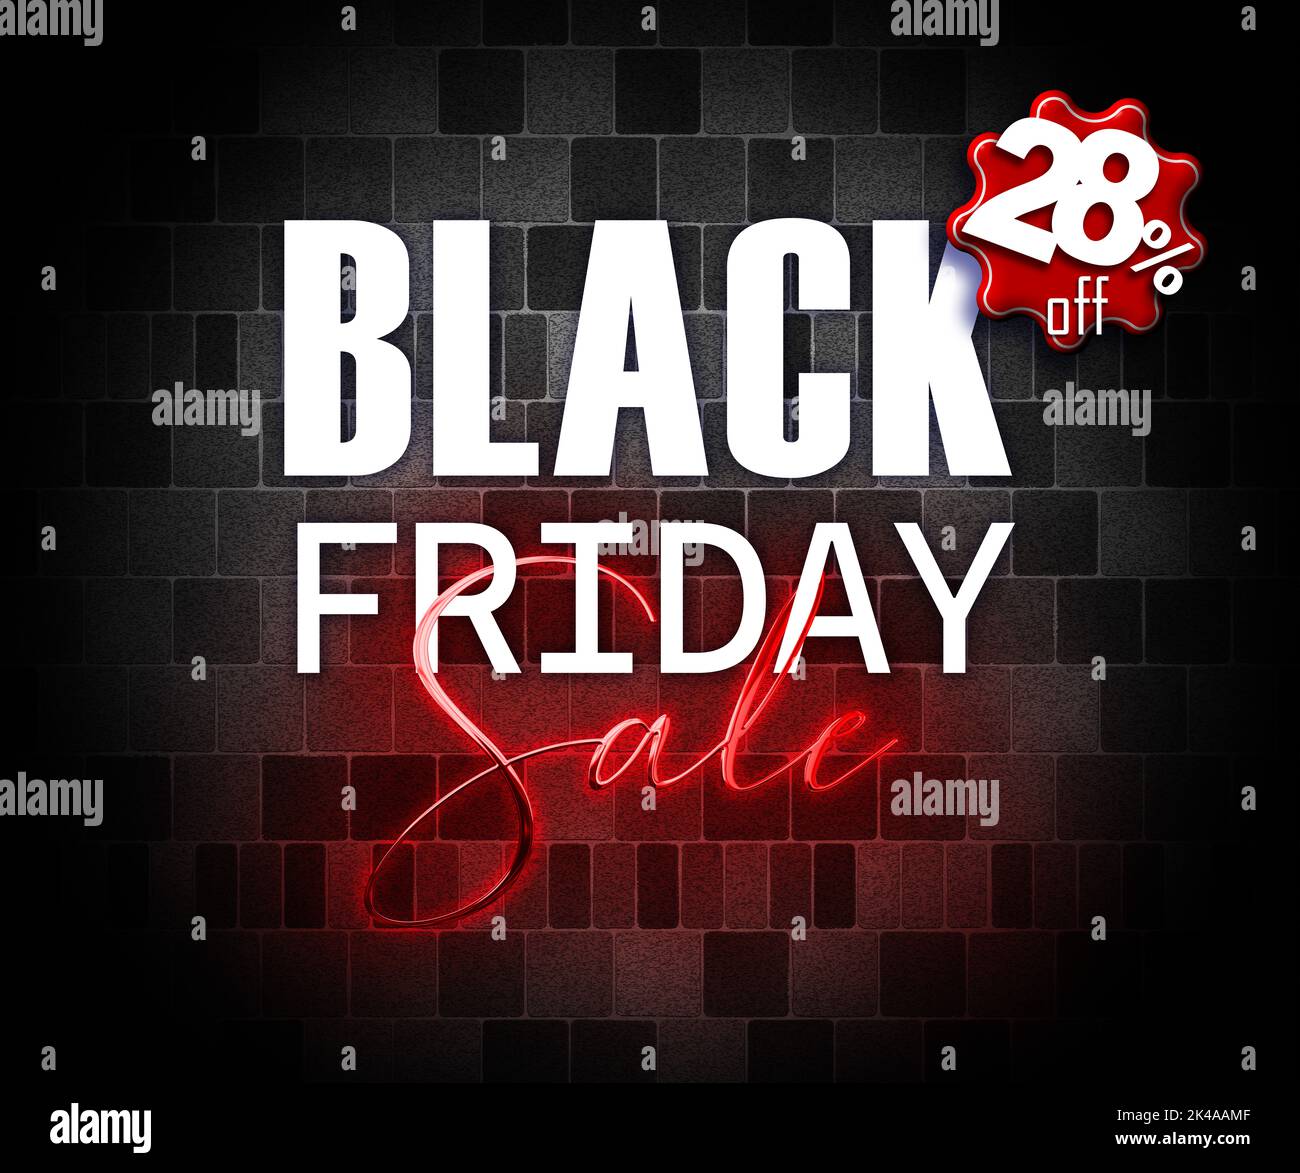 illustration with 3d elements black friday promotion banner 28 percent off sales increase Stock Photo